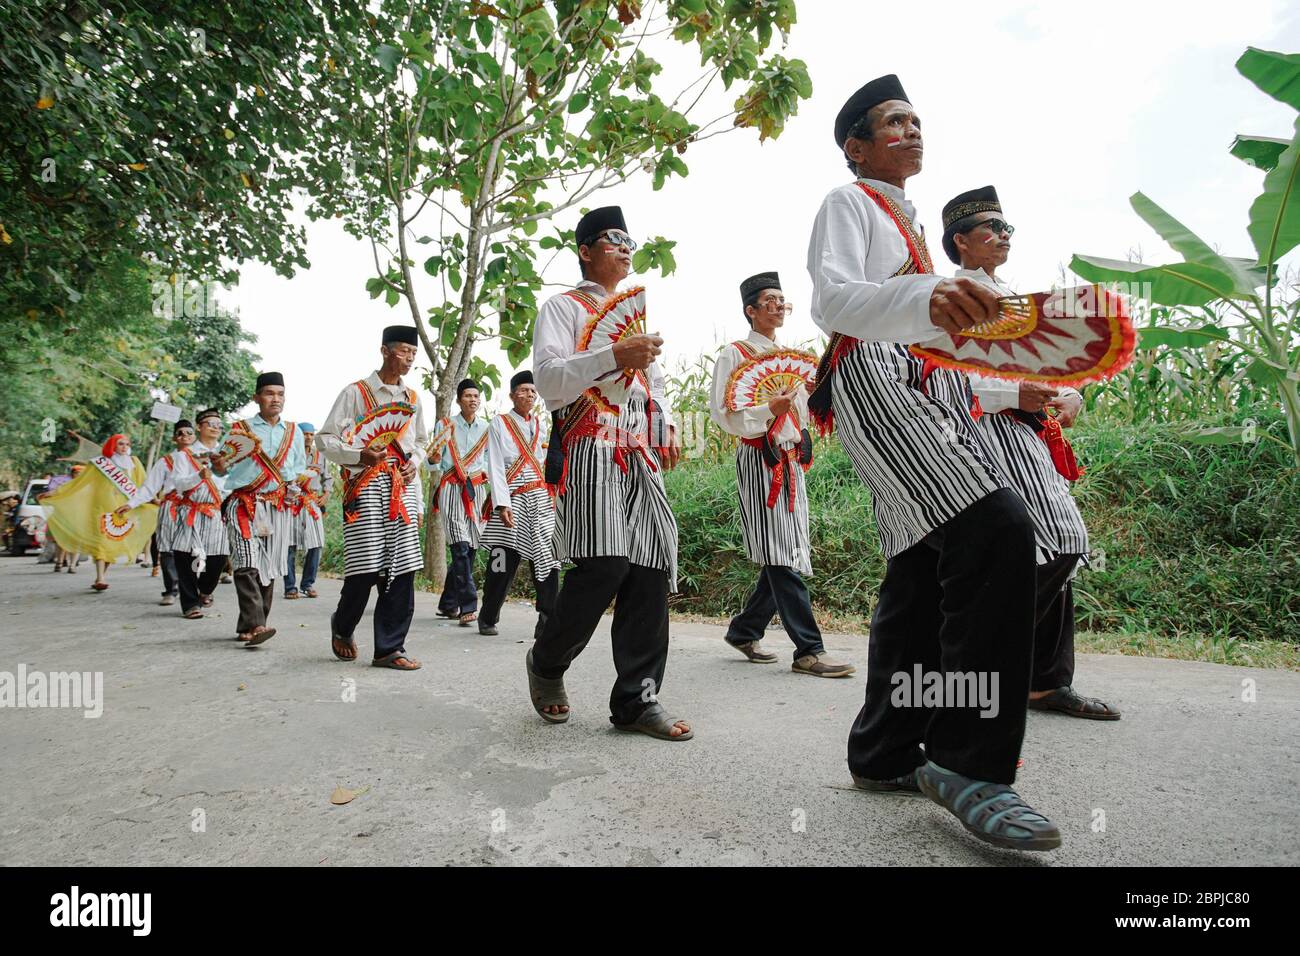 Men performing Rodat, a traditional Islamic art performance from Semarang regency, Central Java, Indonesia Stock Photo